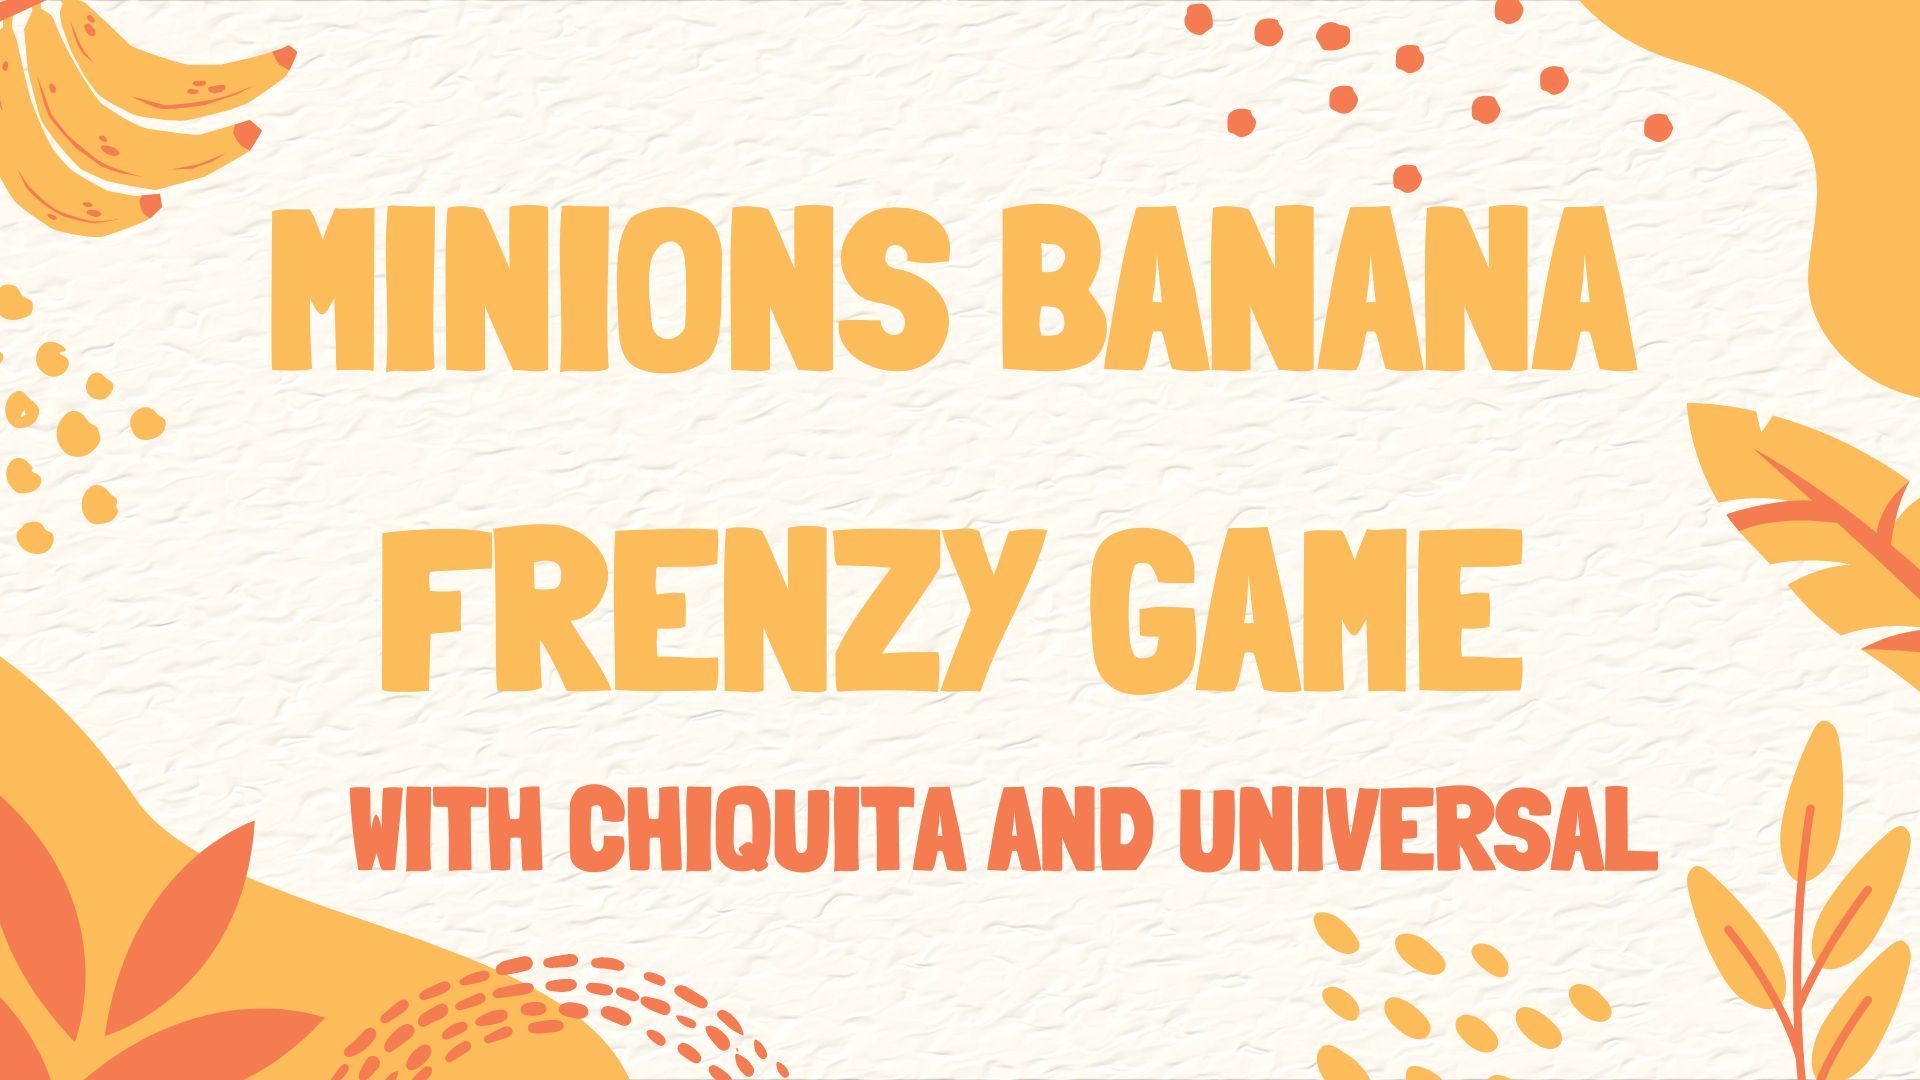 Minions Banana Frenzy Game With Chiquita and Universal